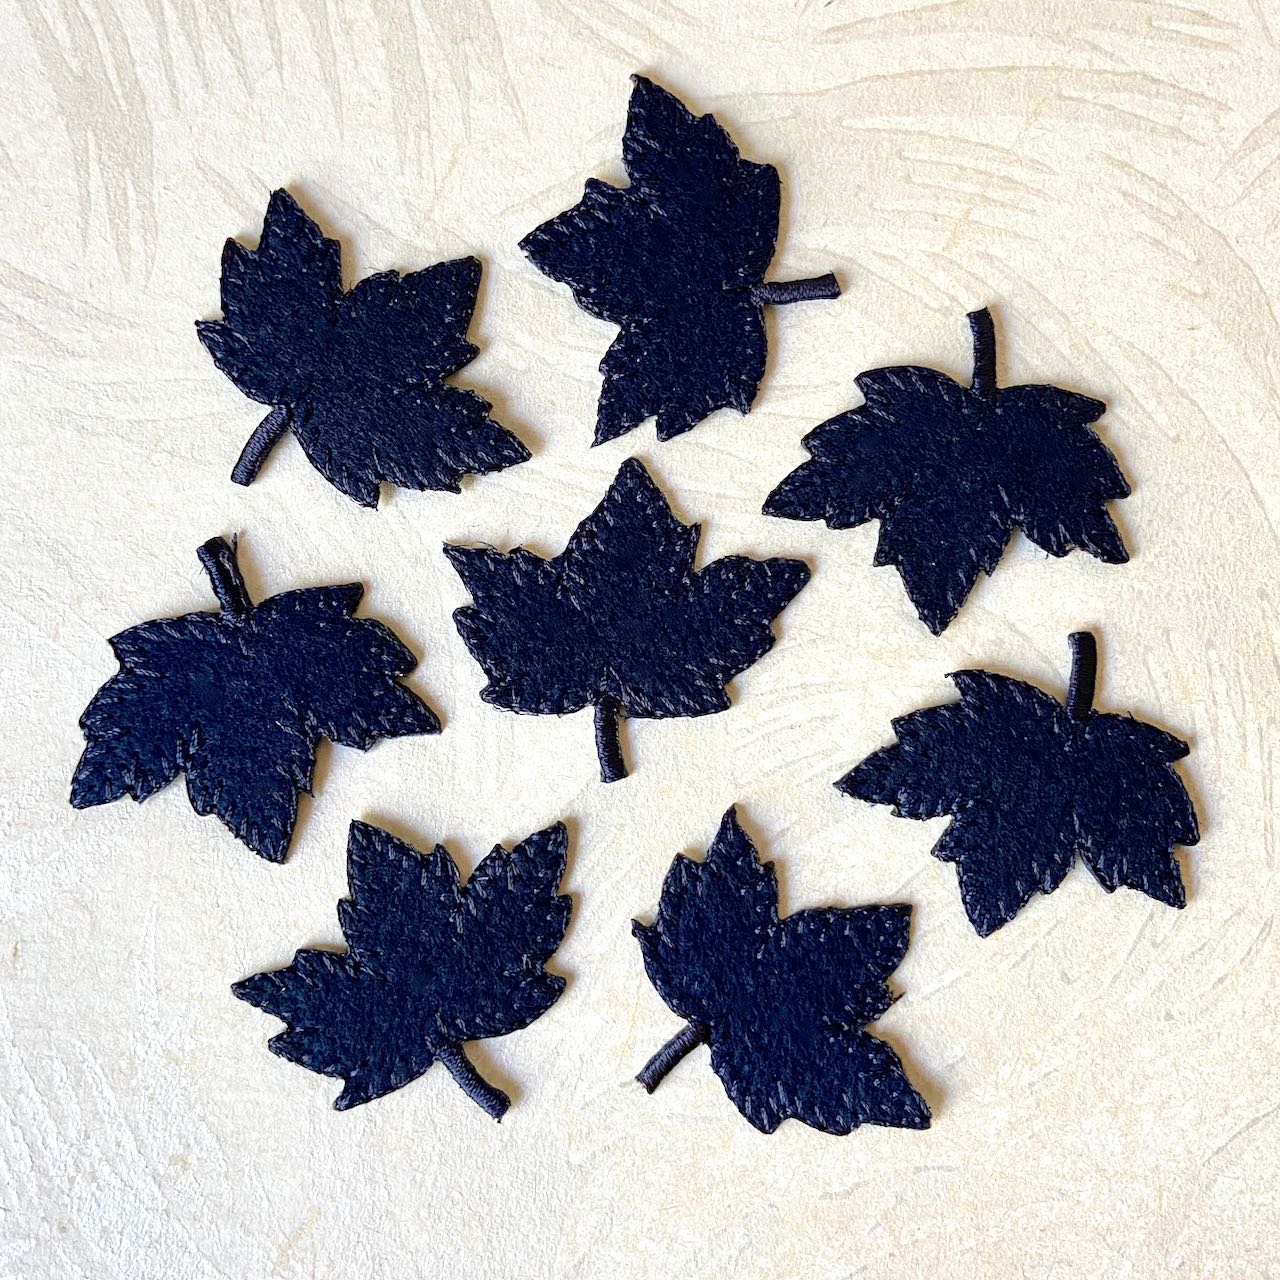 Embroidered Maple Leaf Patch Bag Hat Clothing Accessories Diy Iron